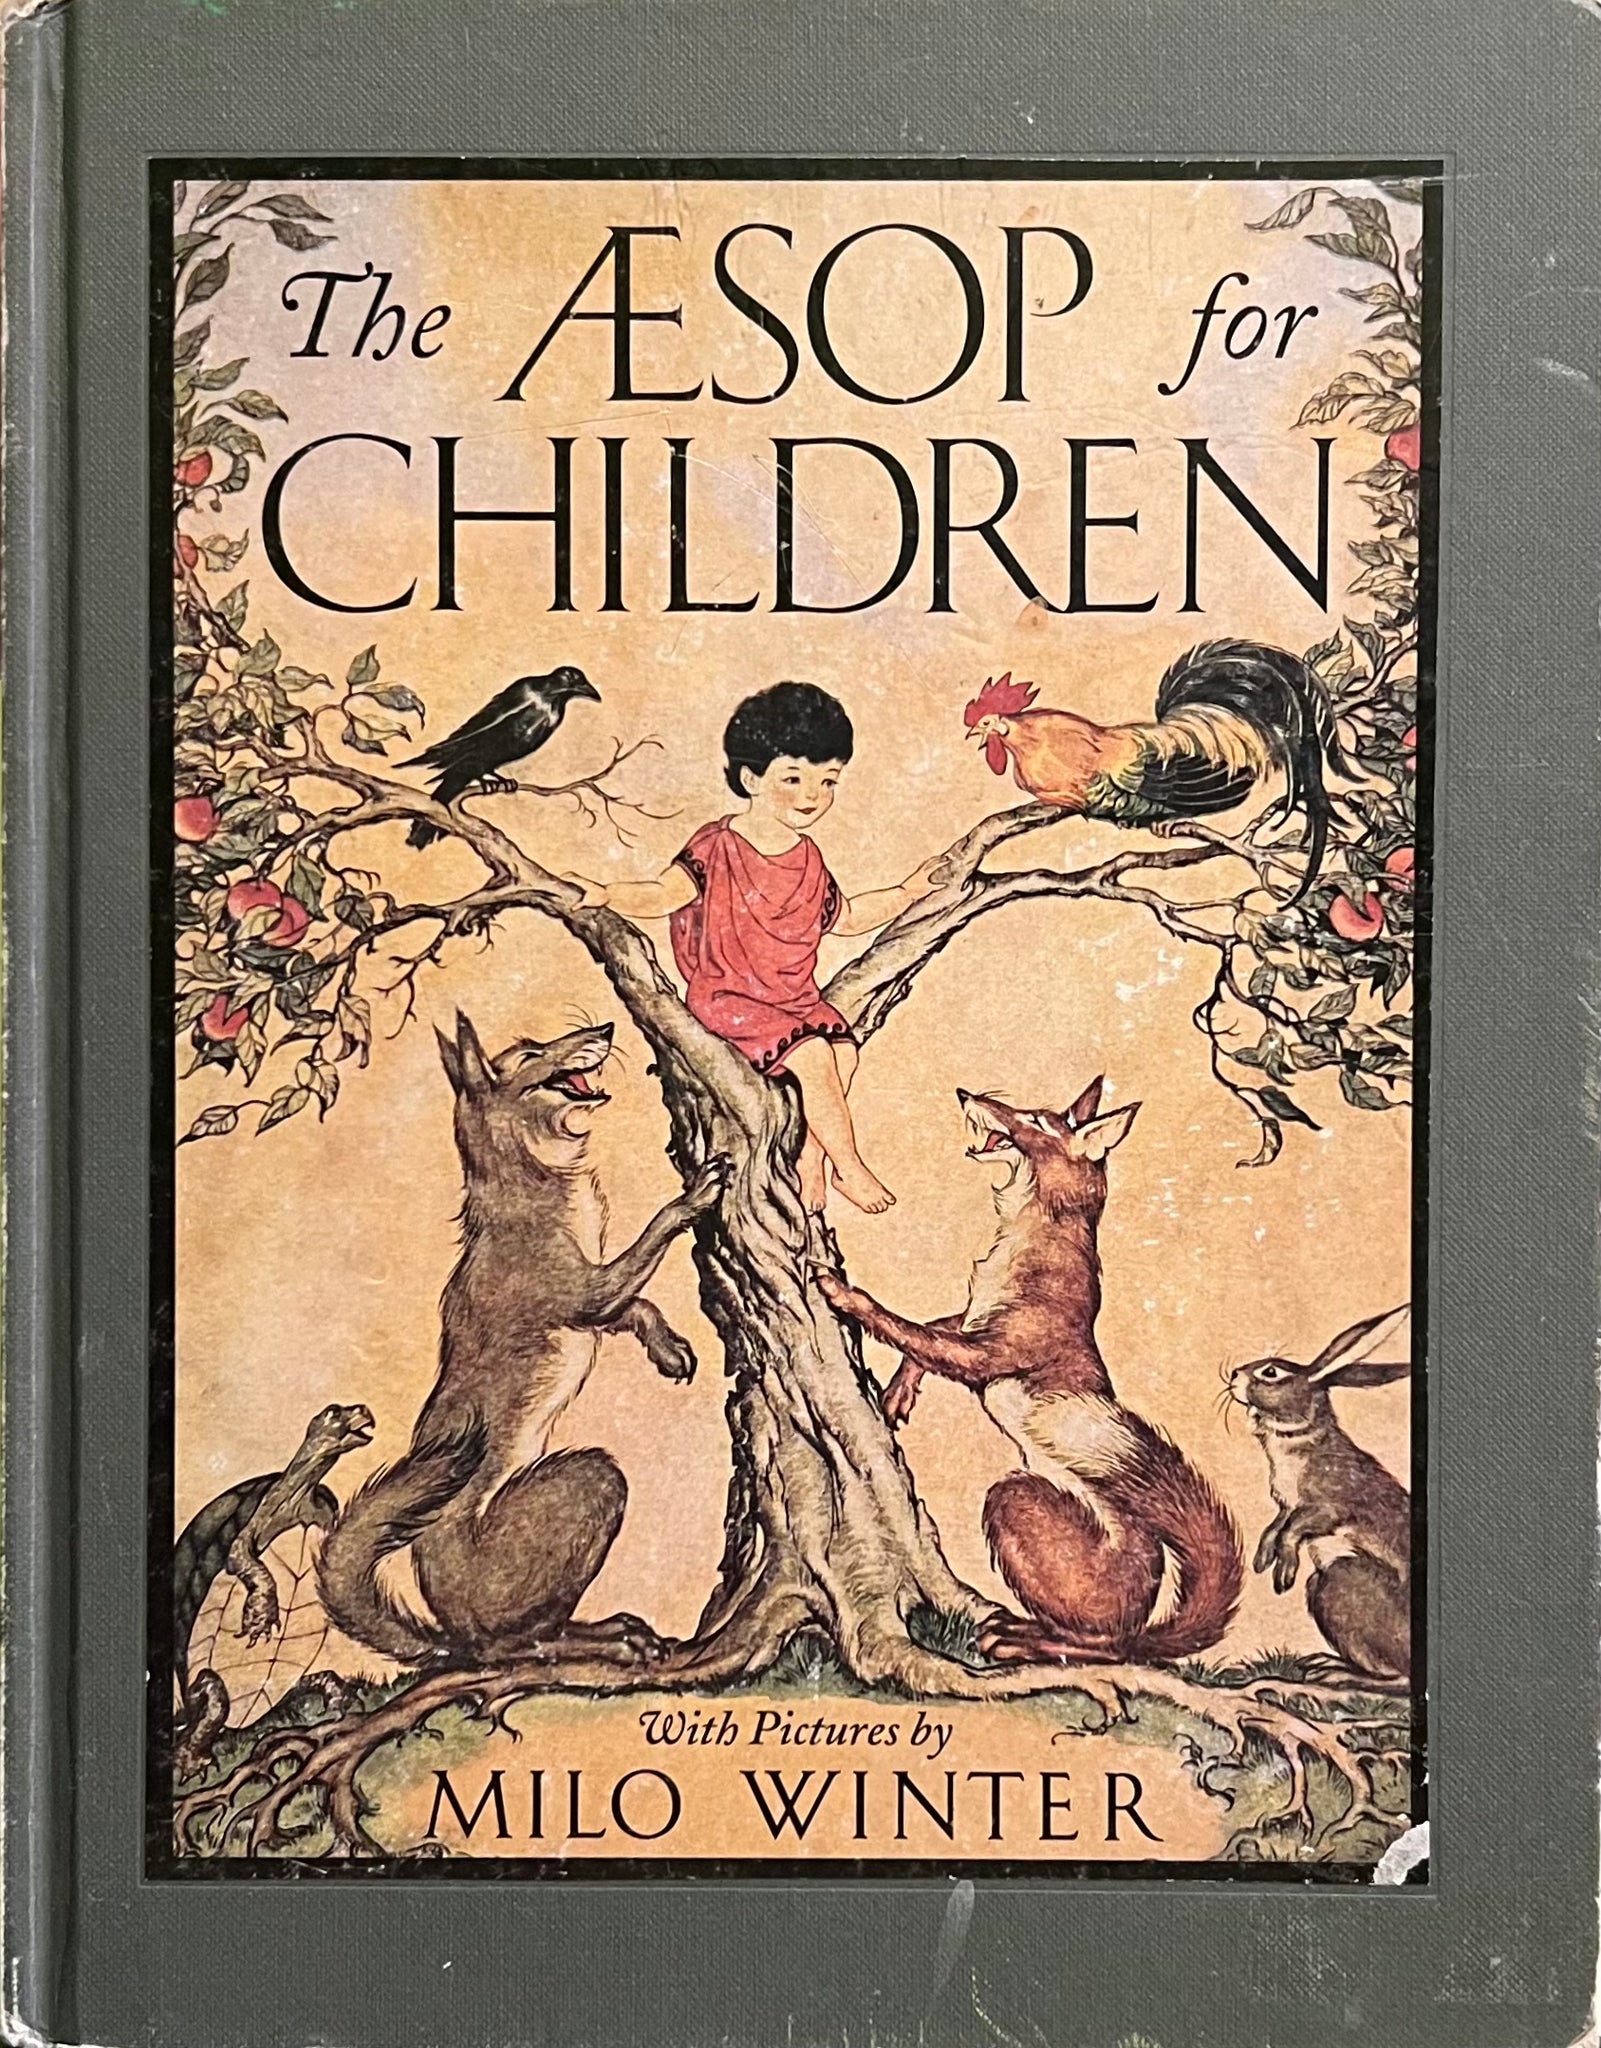 The Aesop for Children, Pictures by Milo Winter